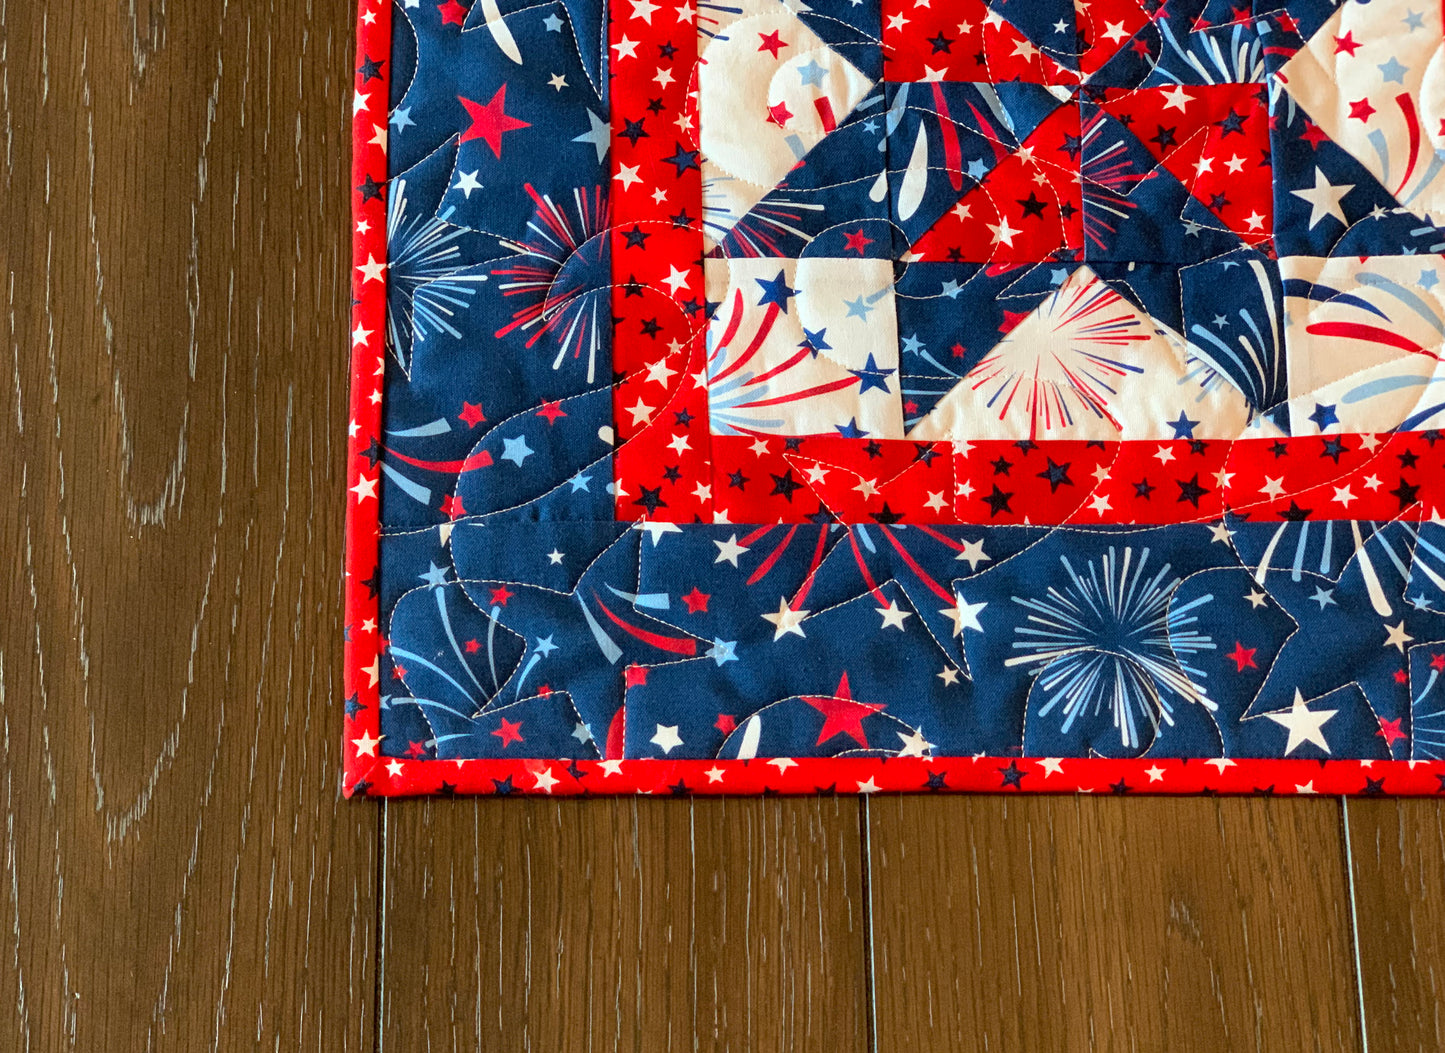 Close up of corner on red white and blue patriotic table runner with four center star blocks that have a pinwheel in the center. The runner has red star sashing between the blocks and a blue fireworks border. Runner is shown displayed on a table.